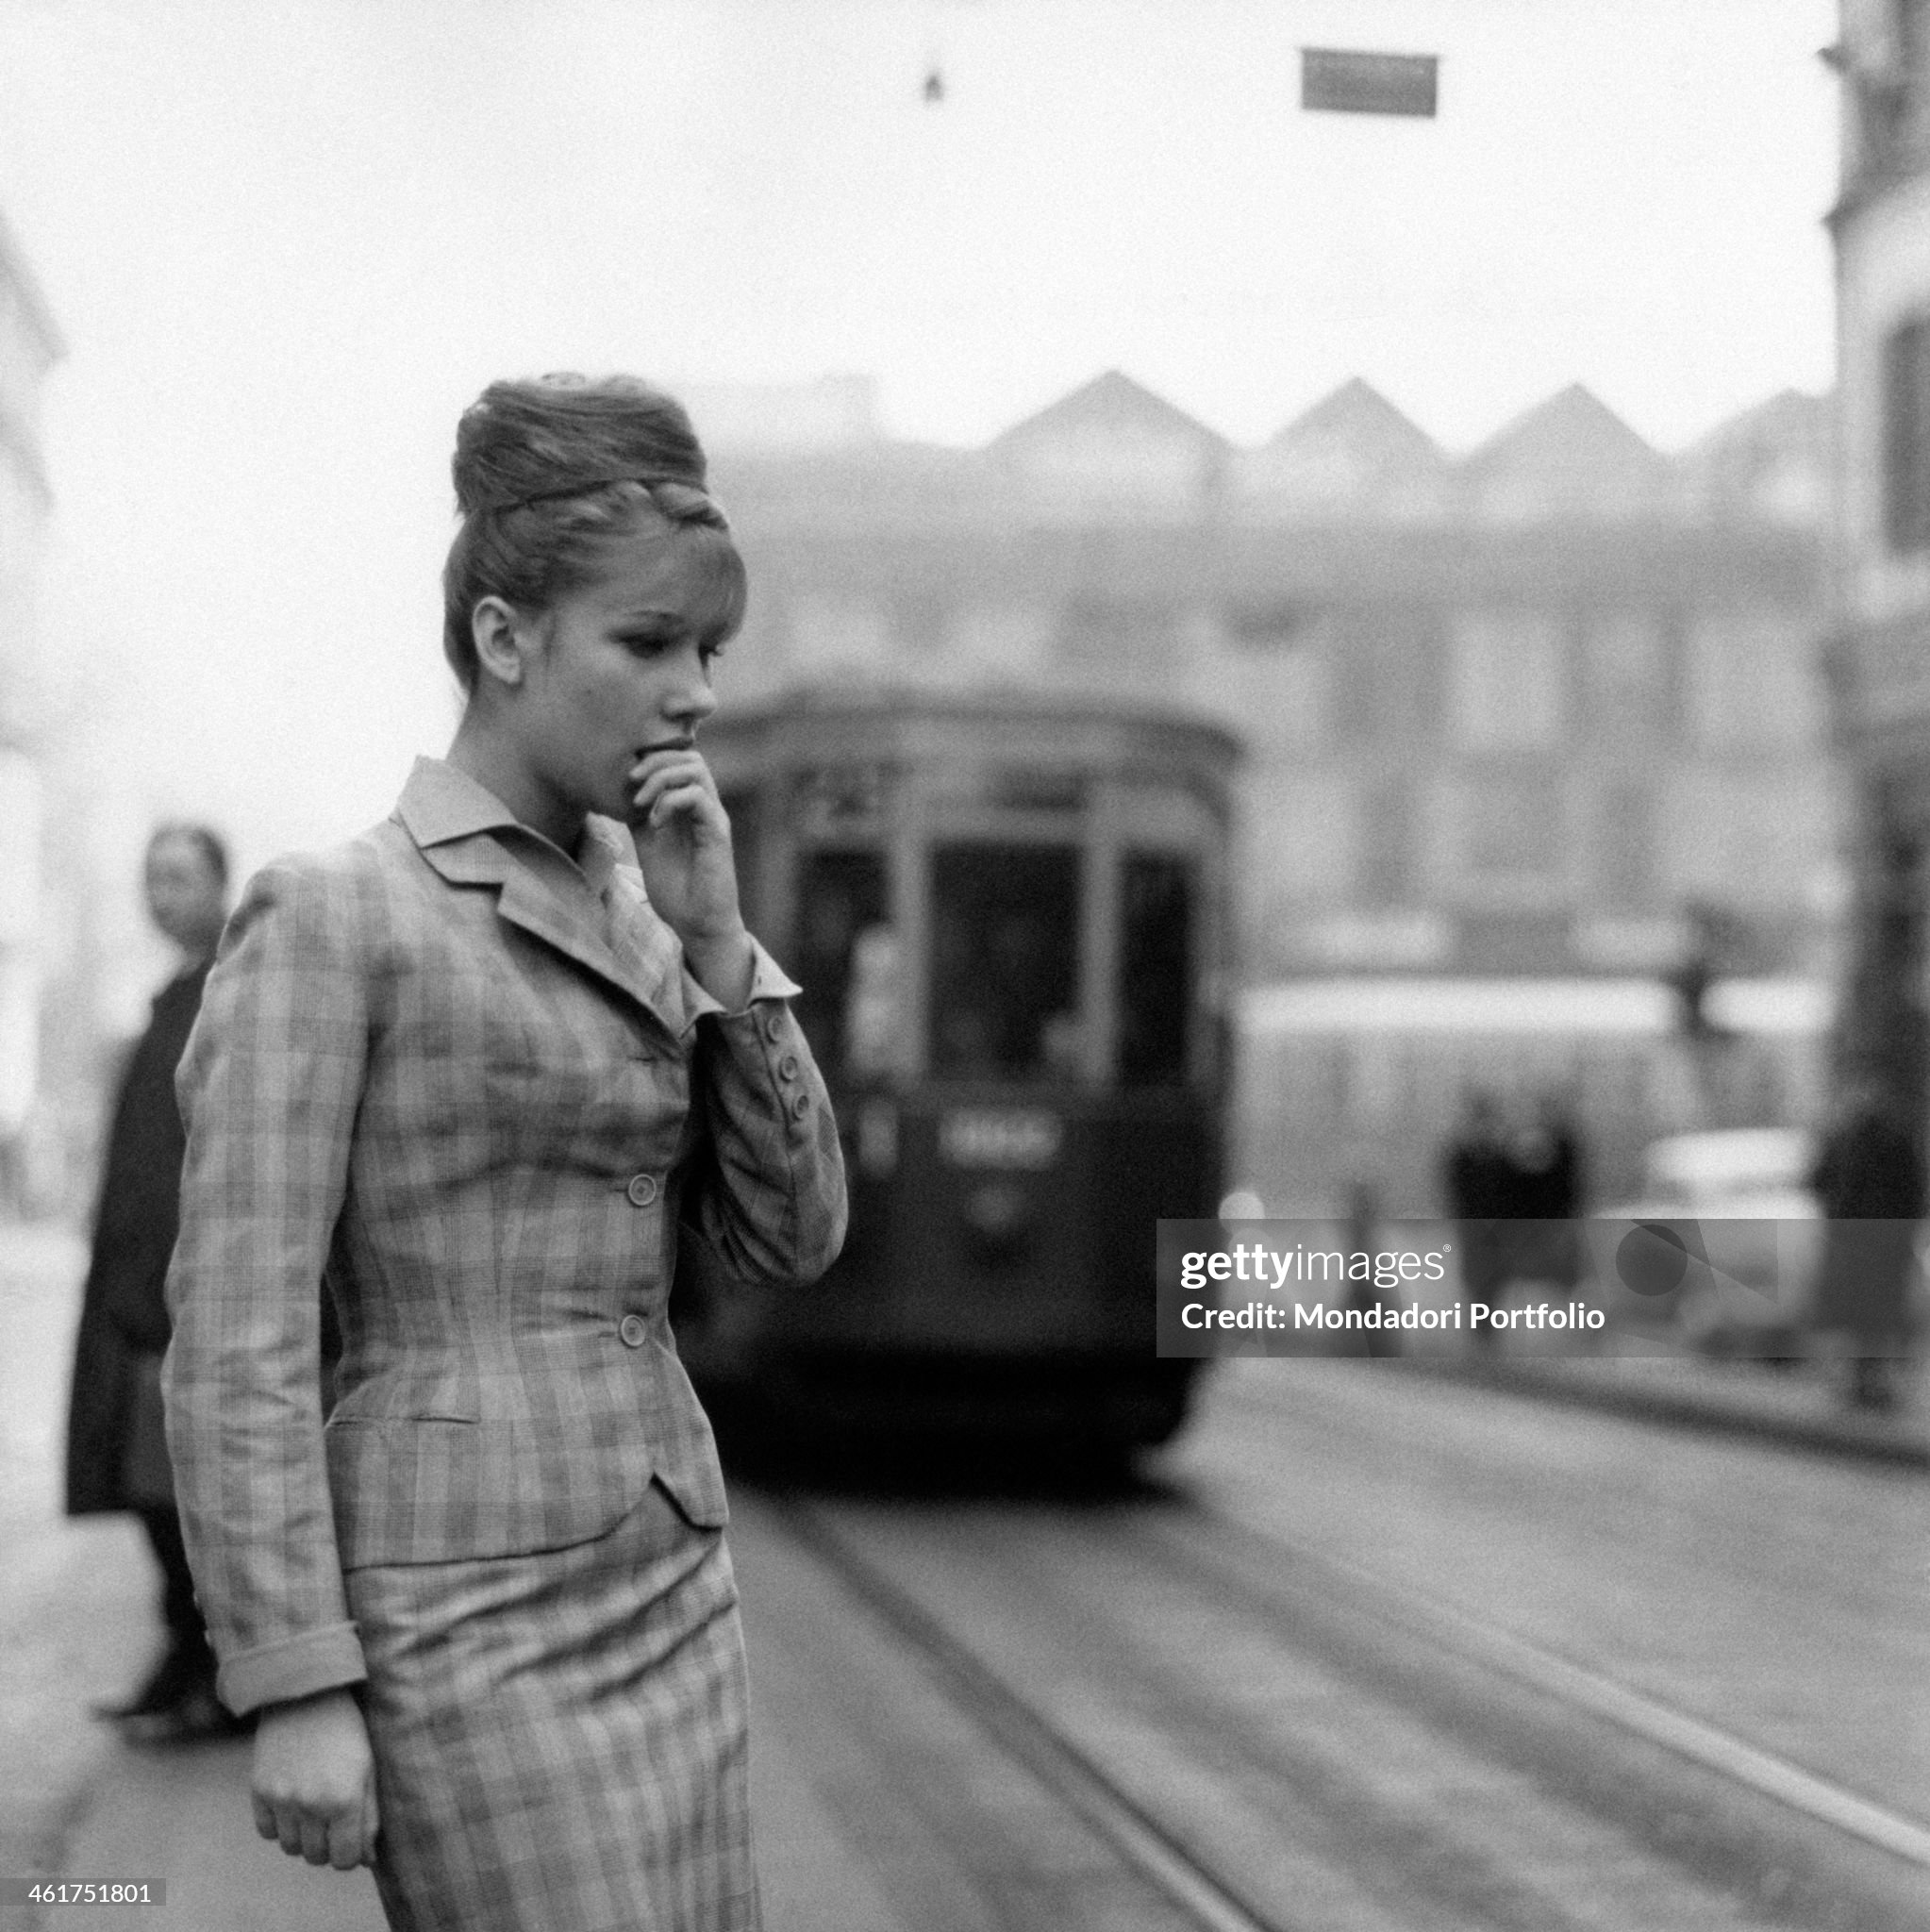 A young woman looking thoughtful by the tram rails in Milan in April 1961.